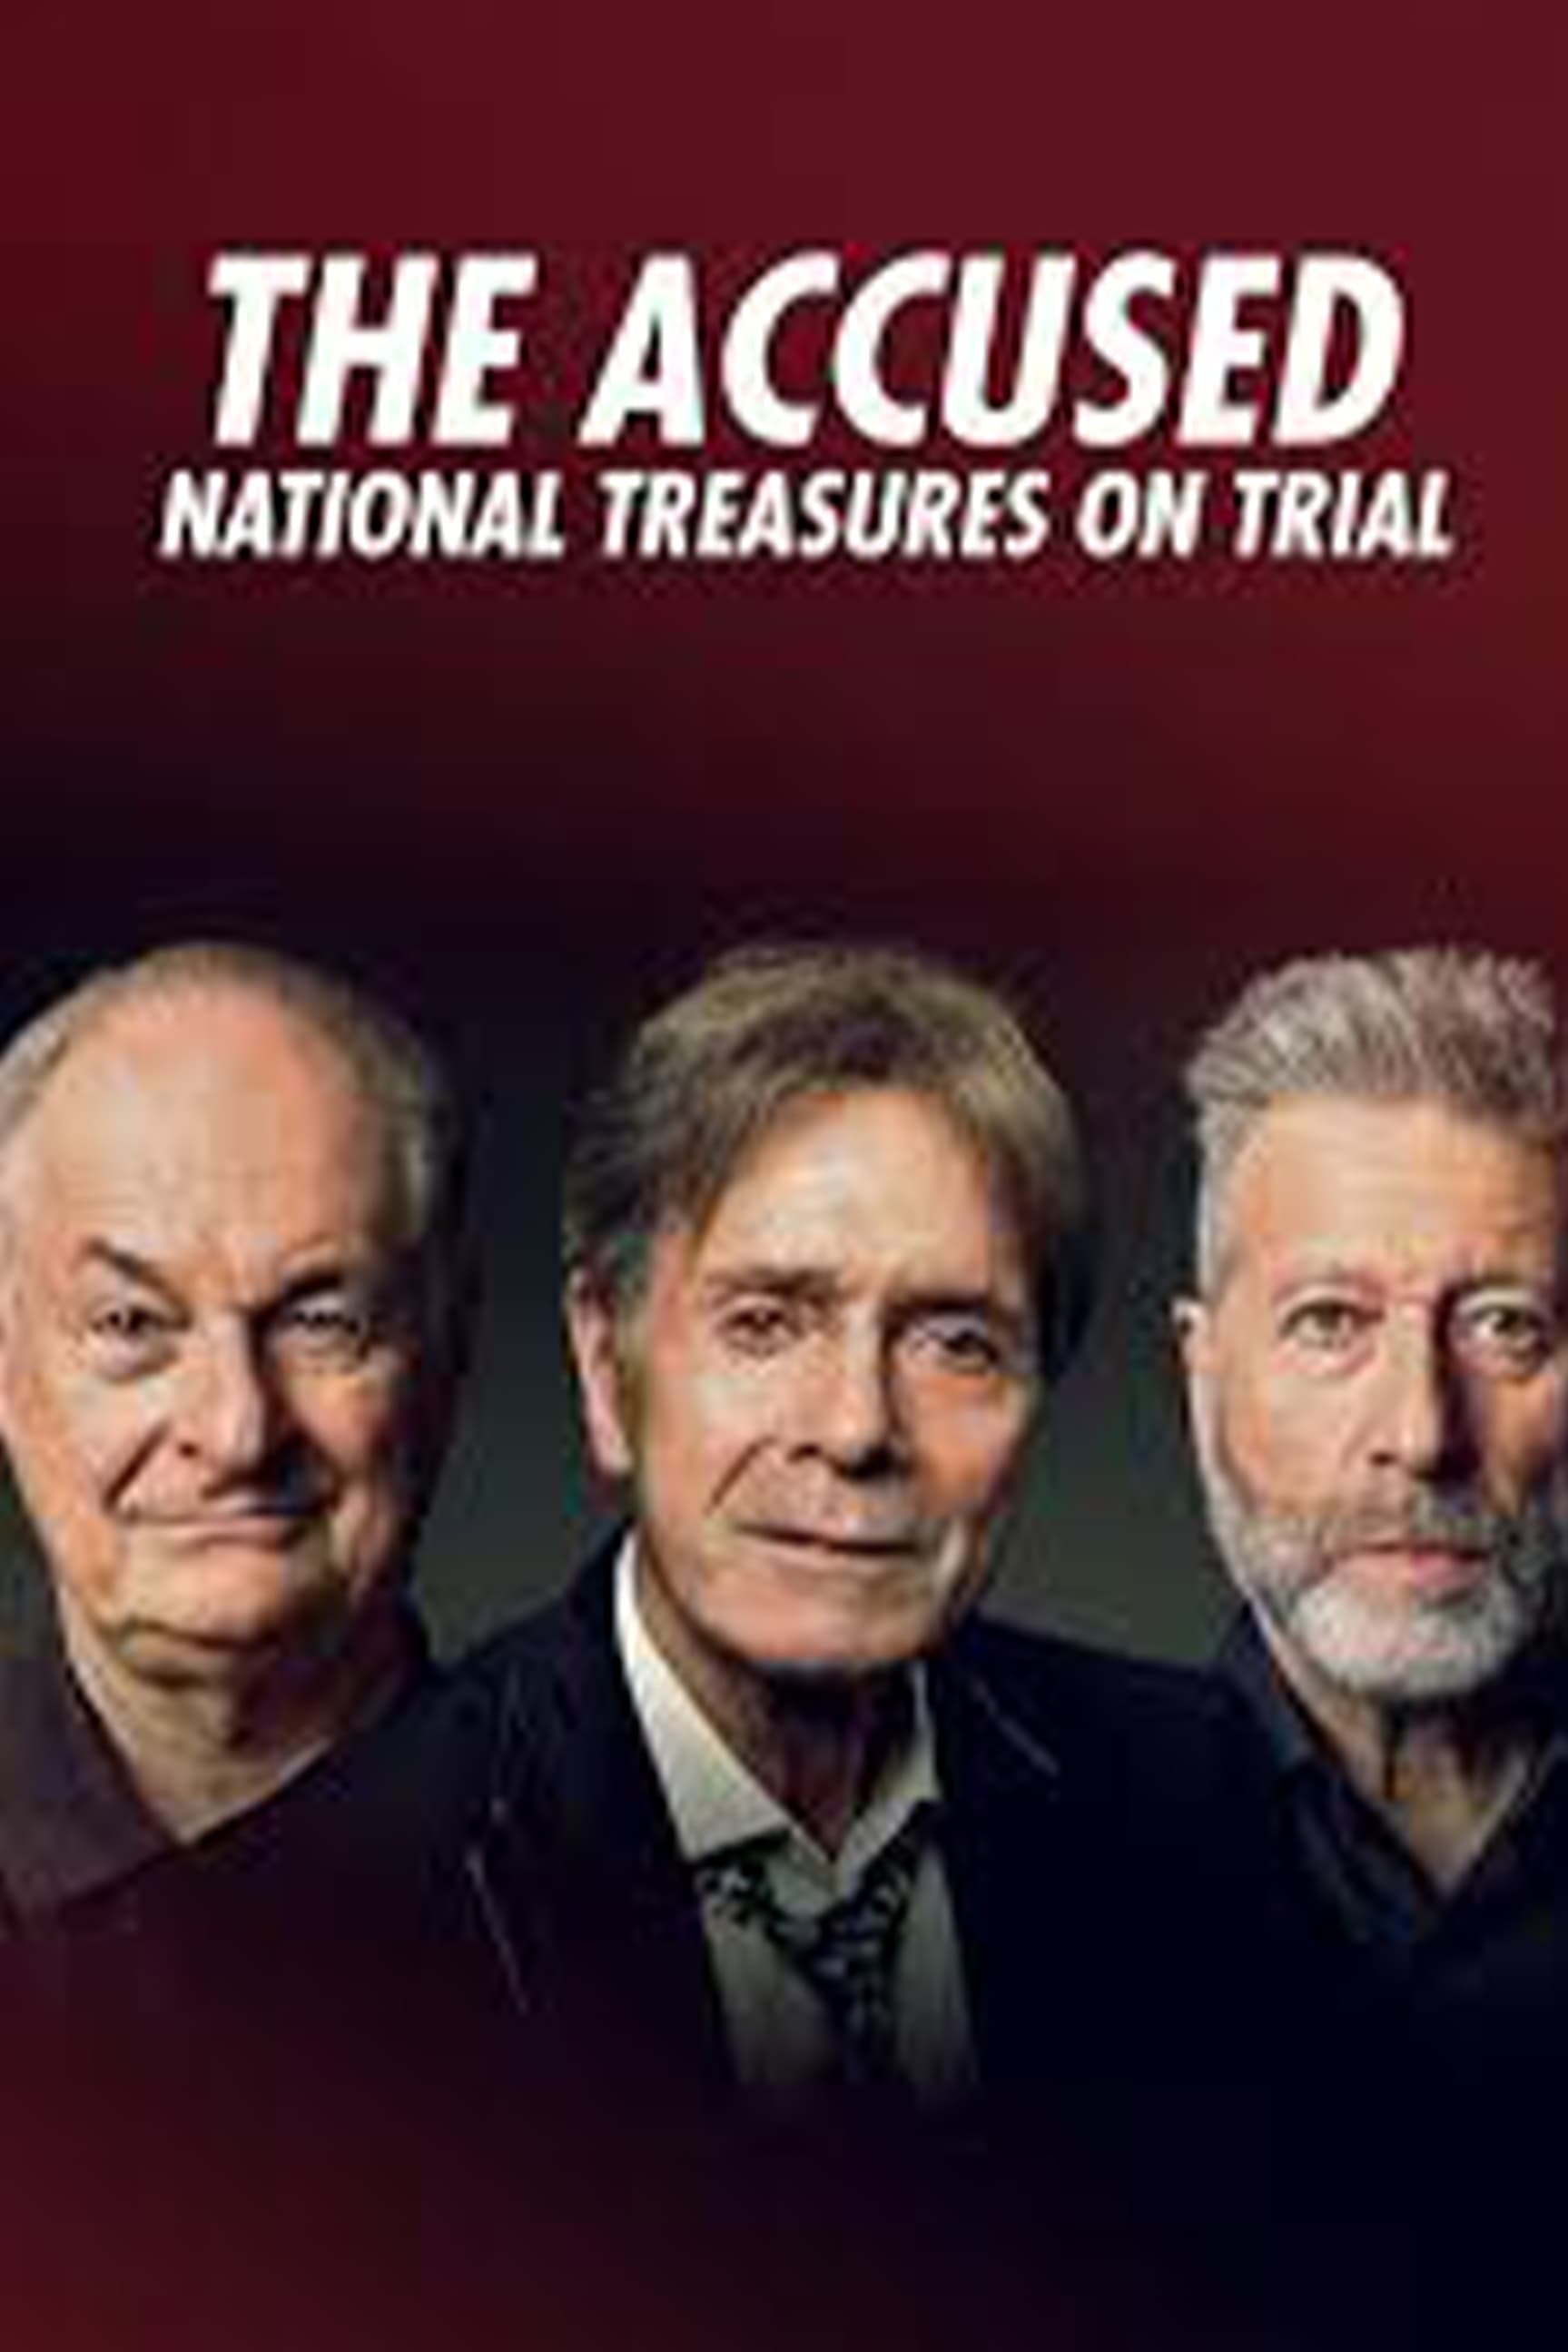 The Accused: National Treasures on Trial